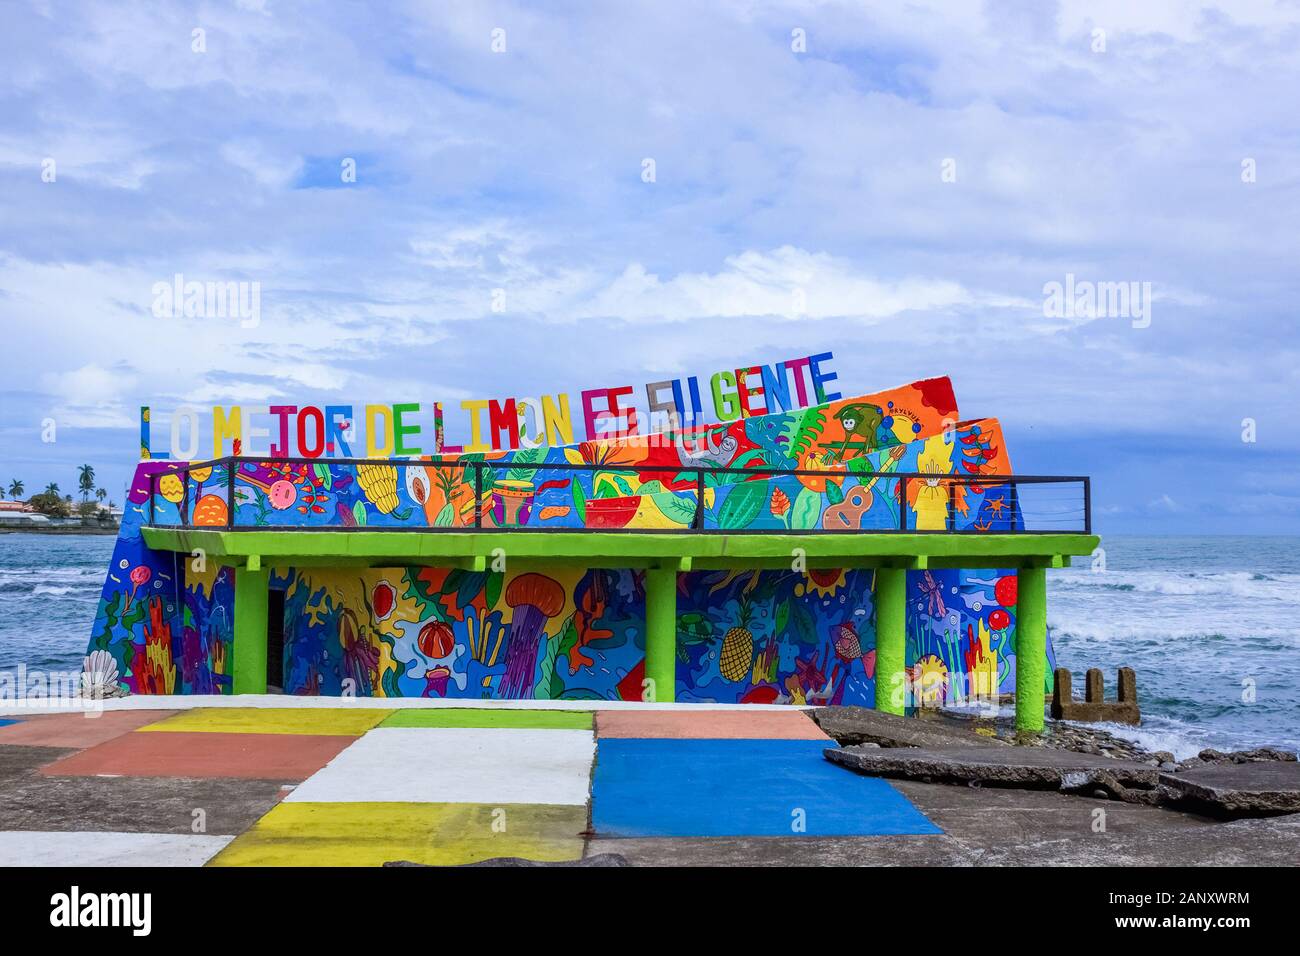 Puerto Limon, Costa Rica - December 8, 2019: The colorful welcome sign at Port Limon Stock Photo